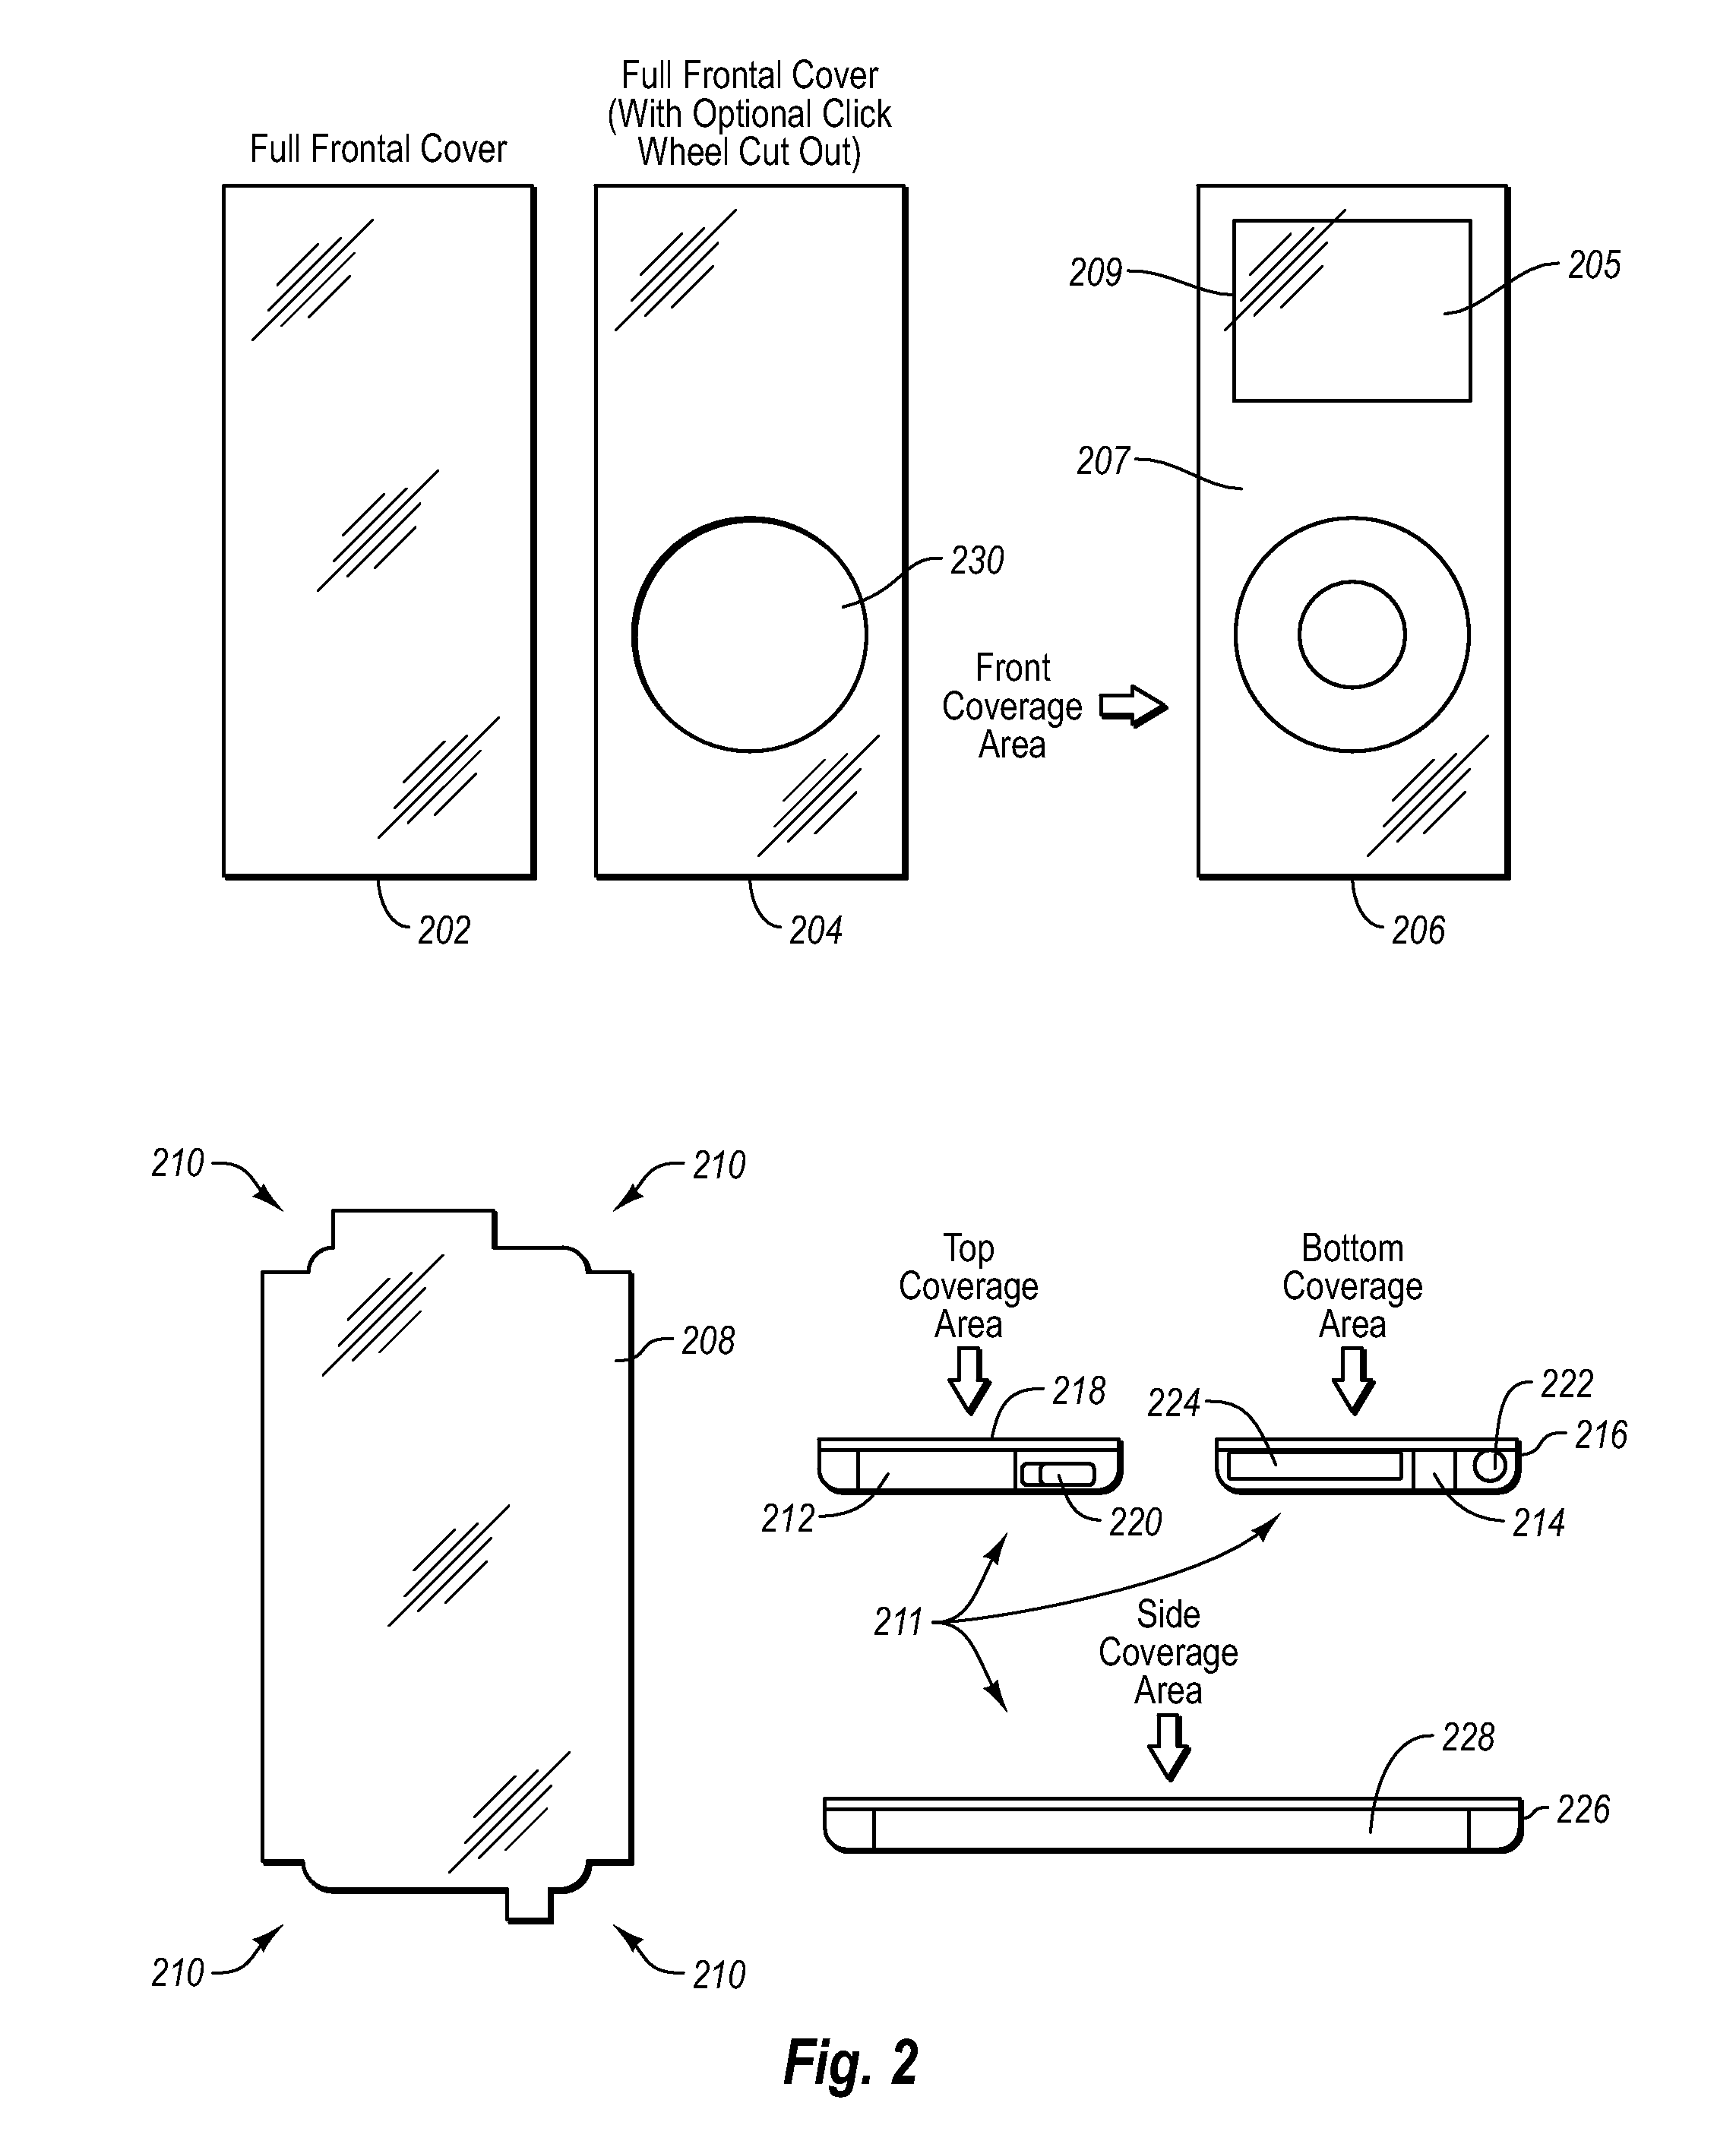 Protective covering for an electronic device